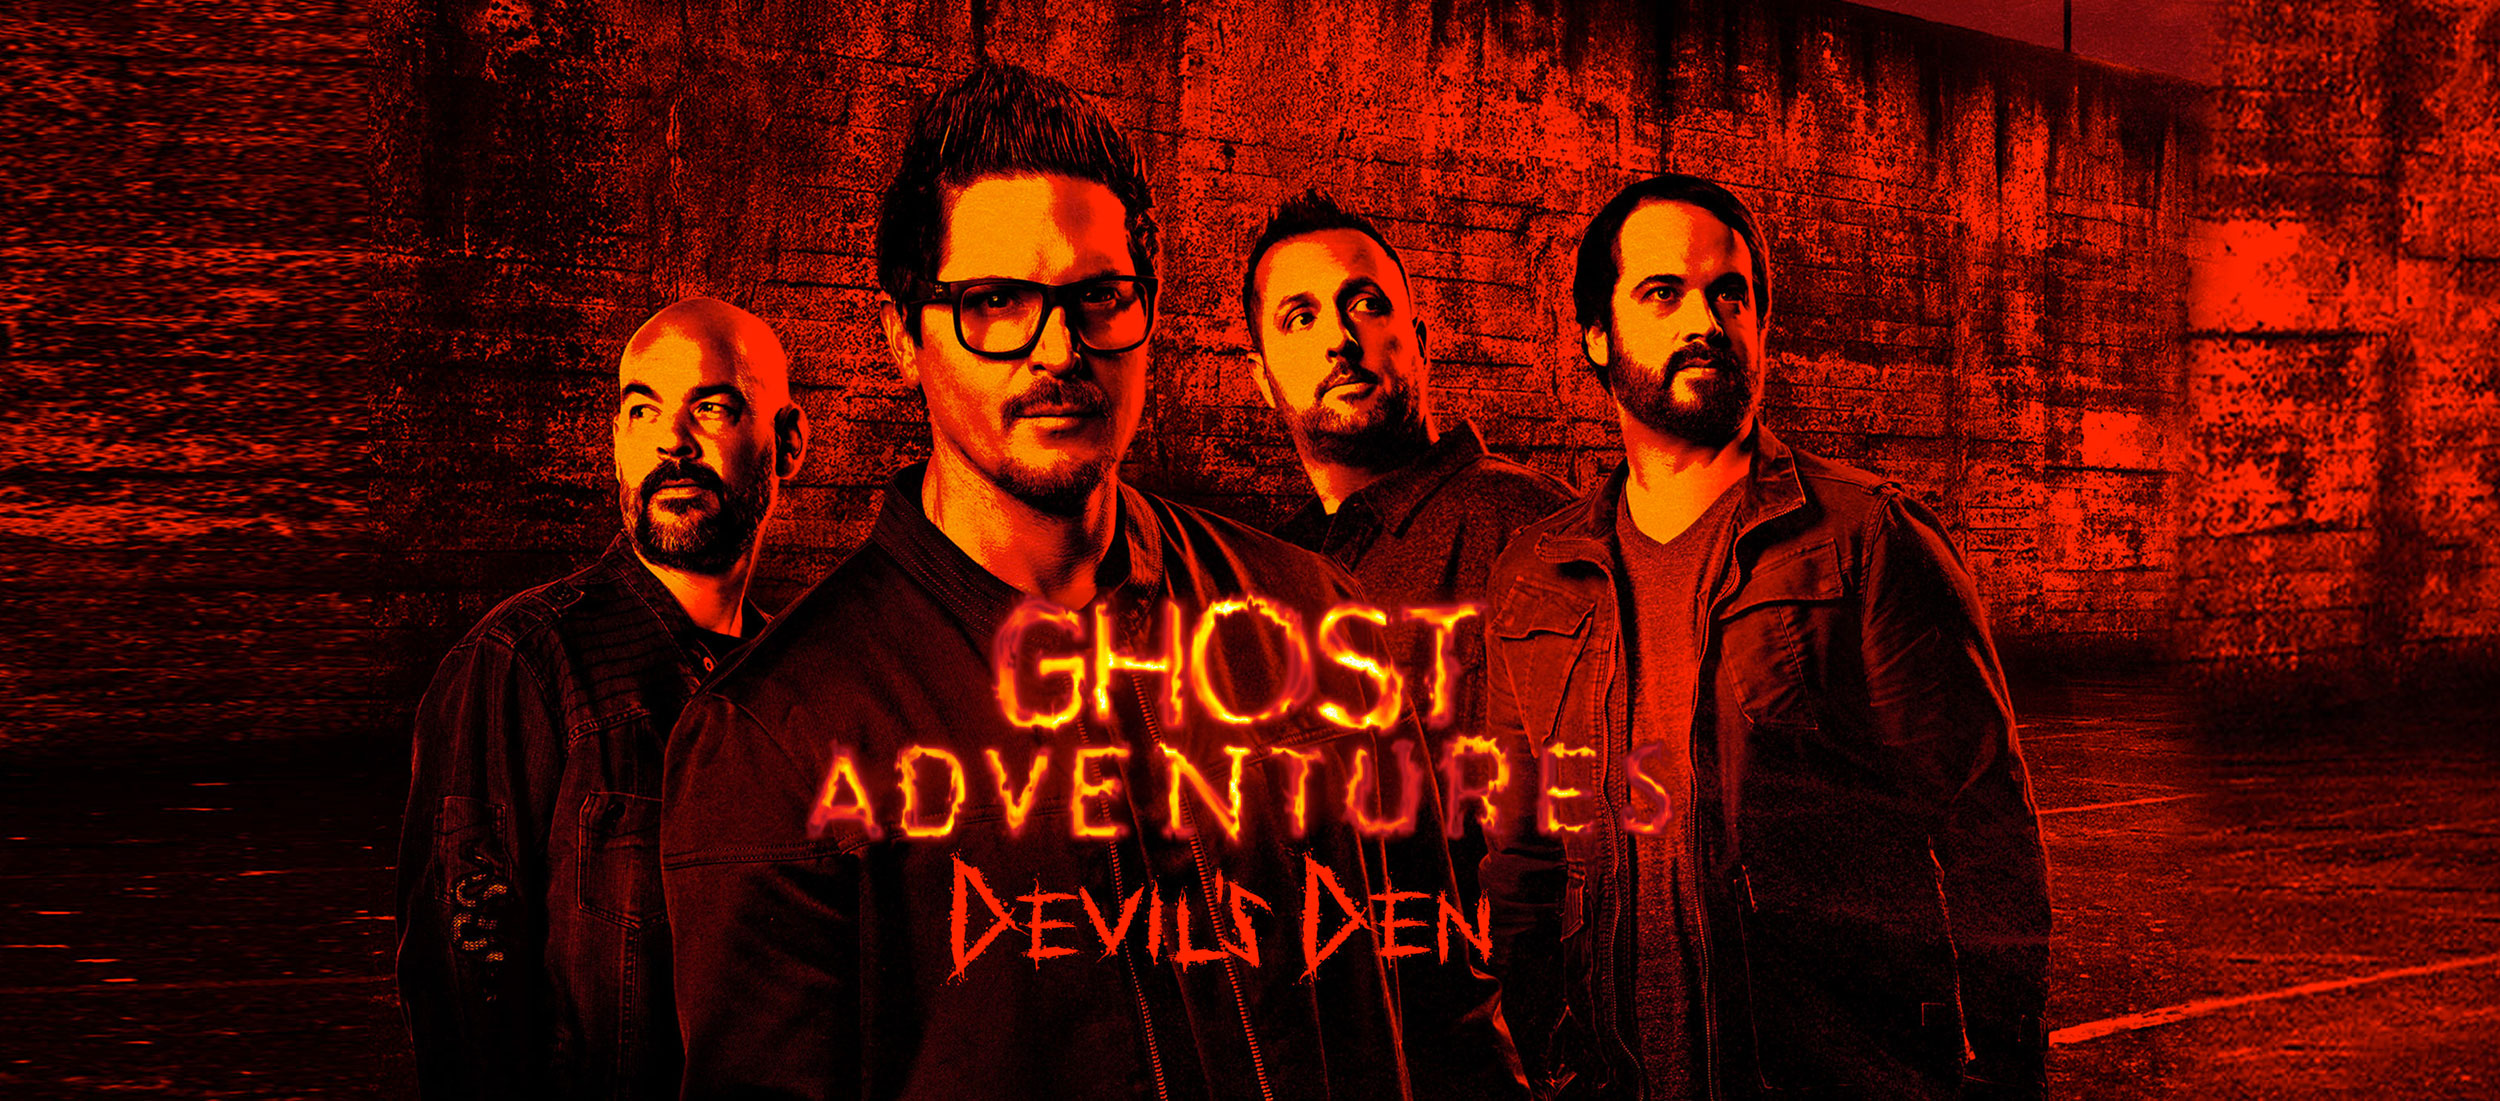 is ghost adventures fake